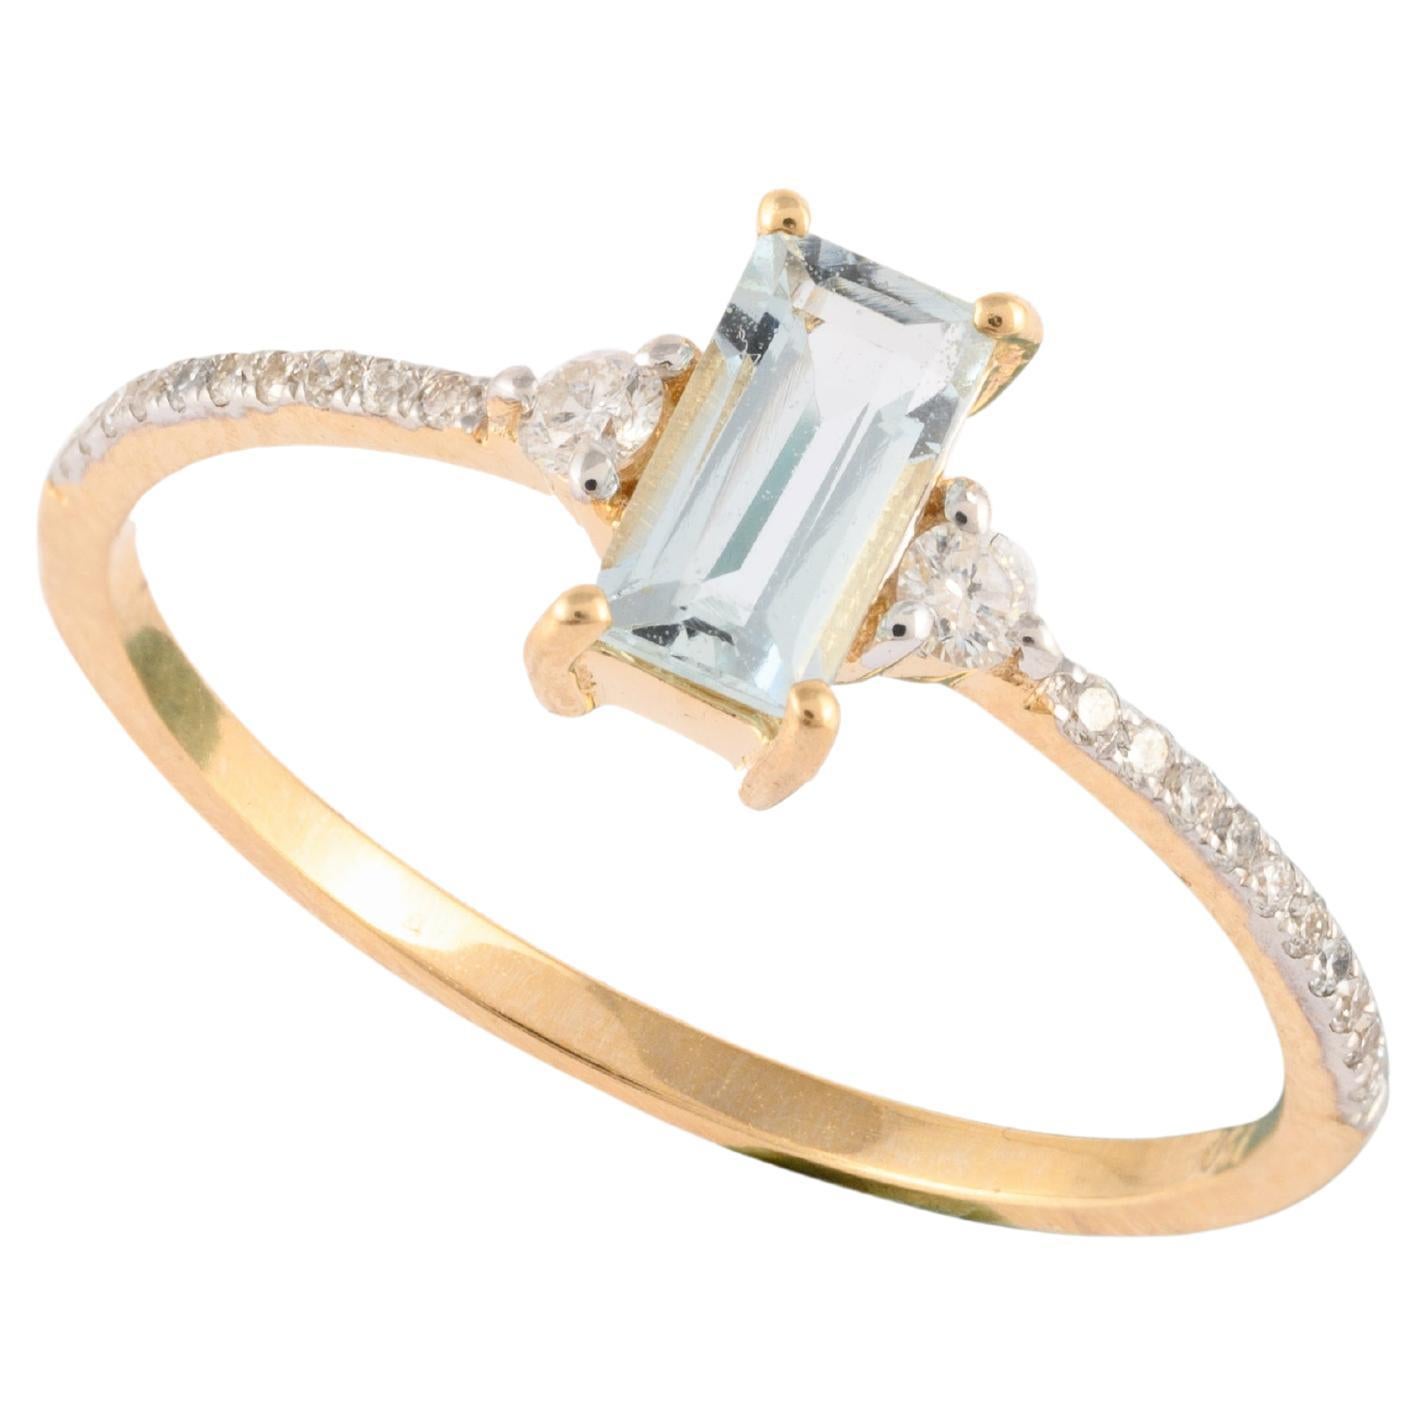 Baguette Cut Aquamarine Ring With Diamonds 18k Solid Yellow Gold